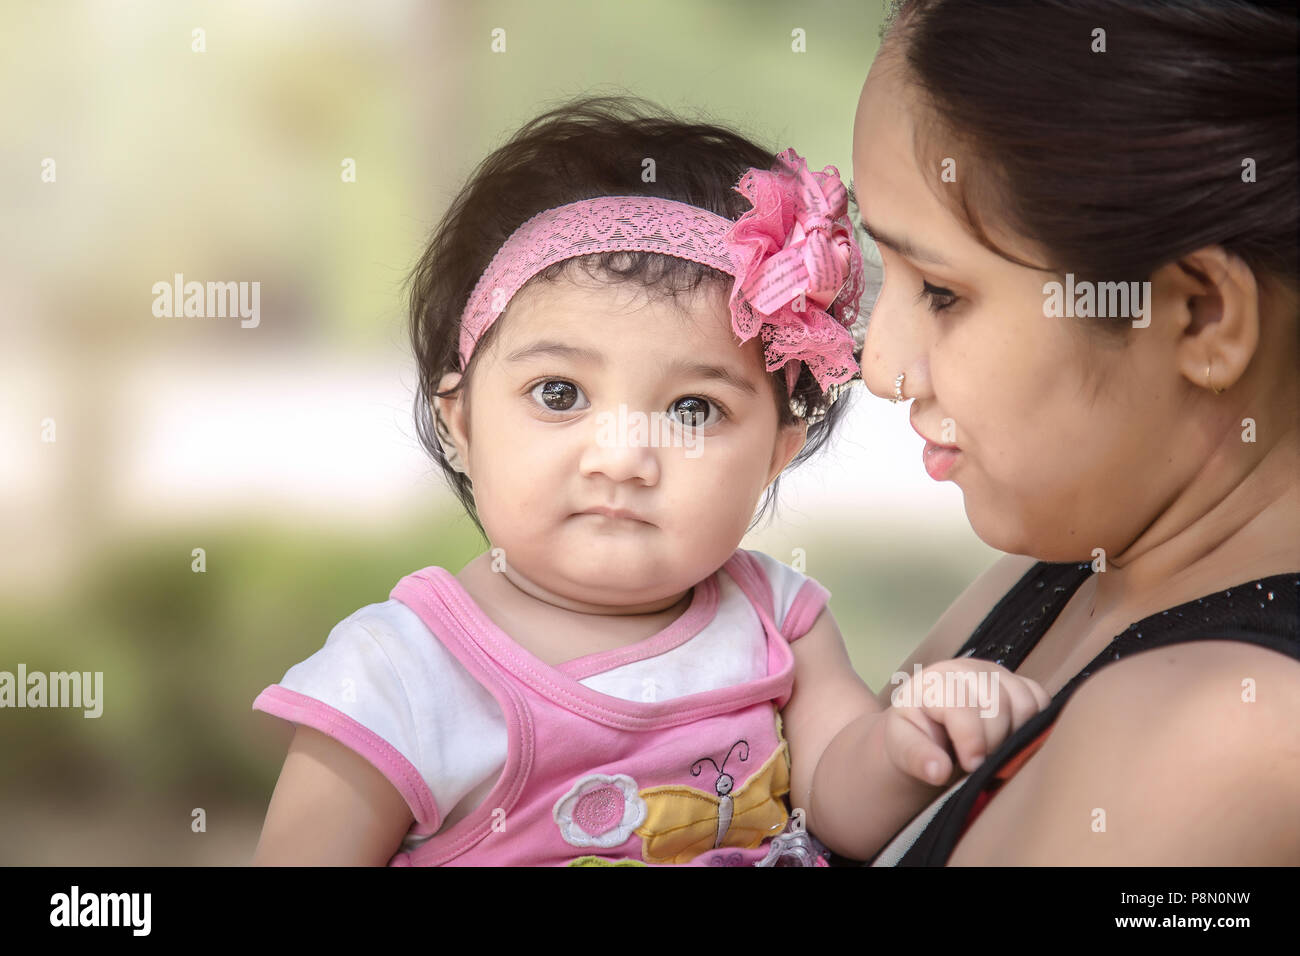 Sad Indian/Asian baby girl in mother arm. Stock Photo